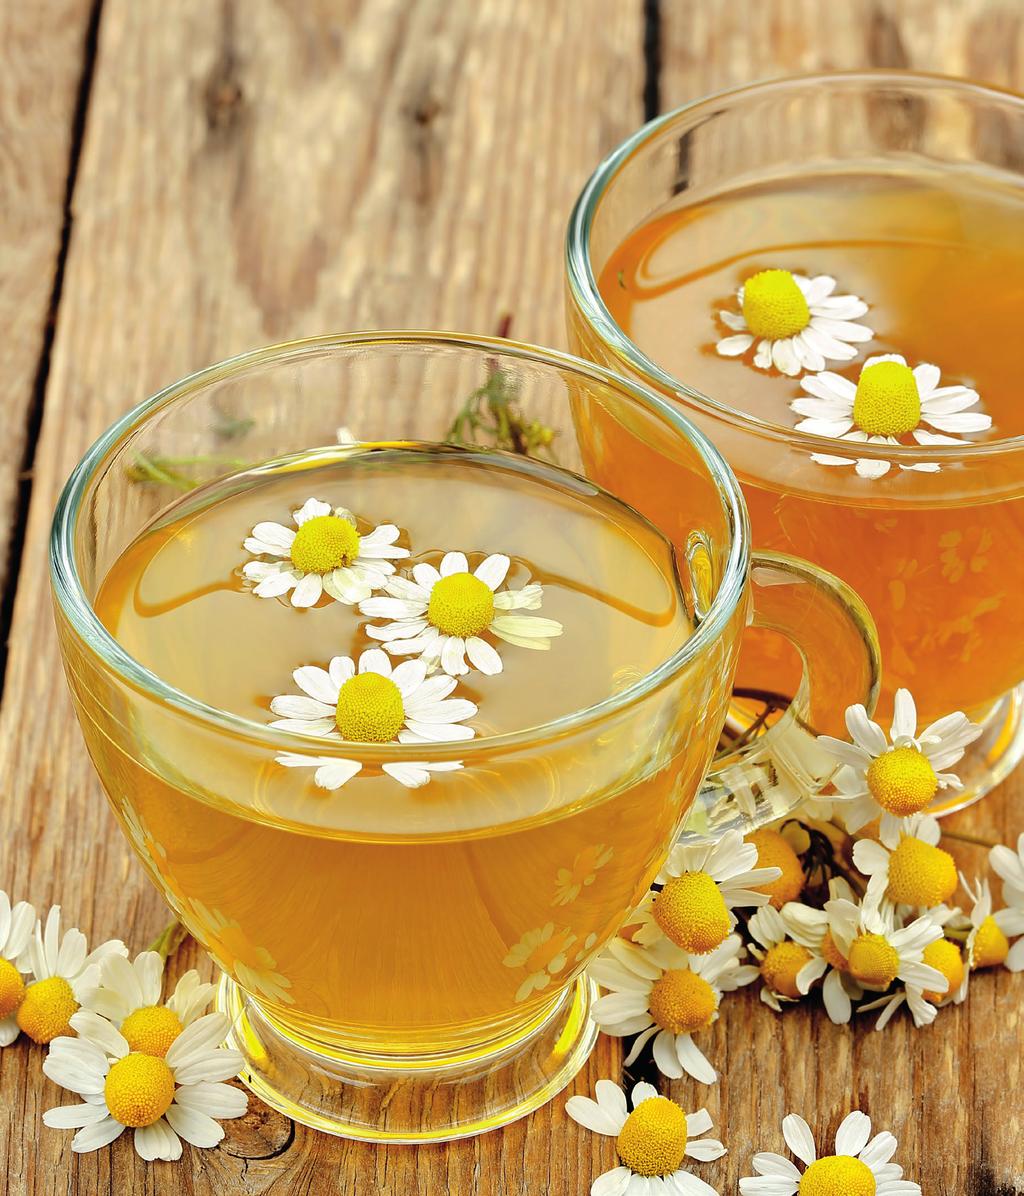 ALPHA-BISABOLOL Alpha-Bisabolol is the main principle of camomile, known to protect the skin against